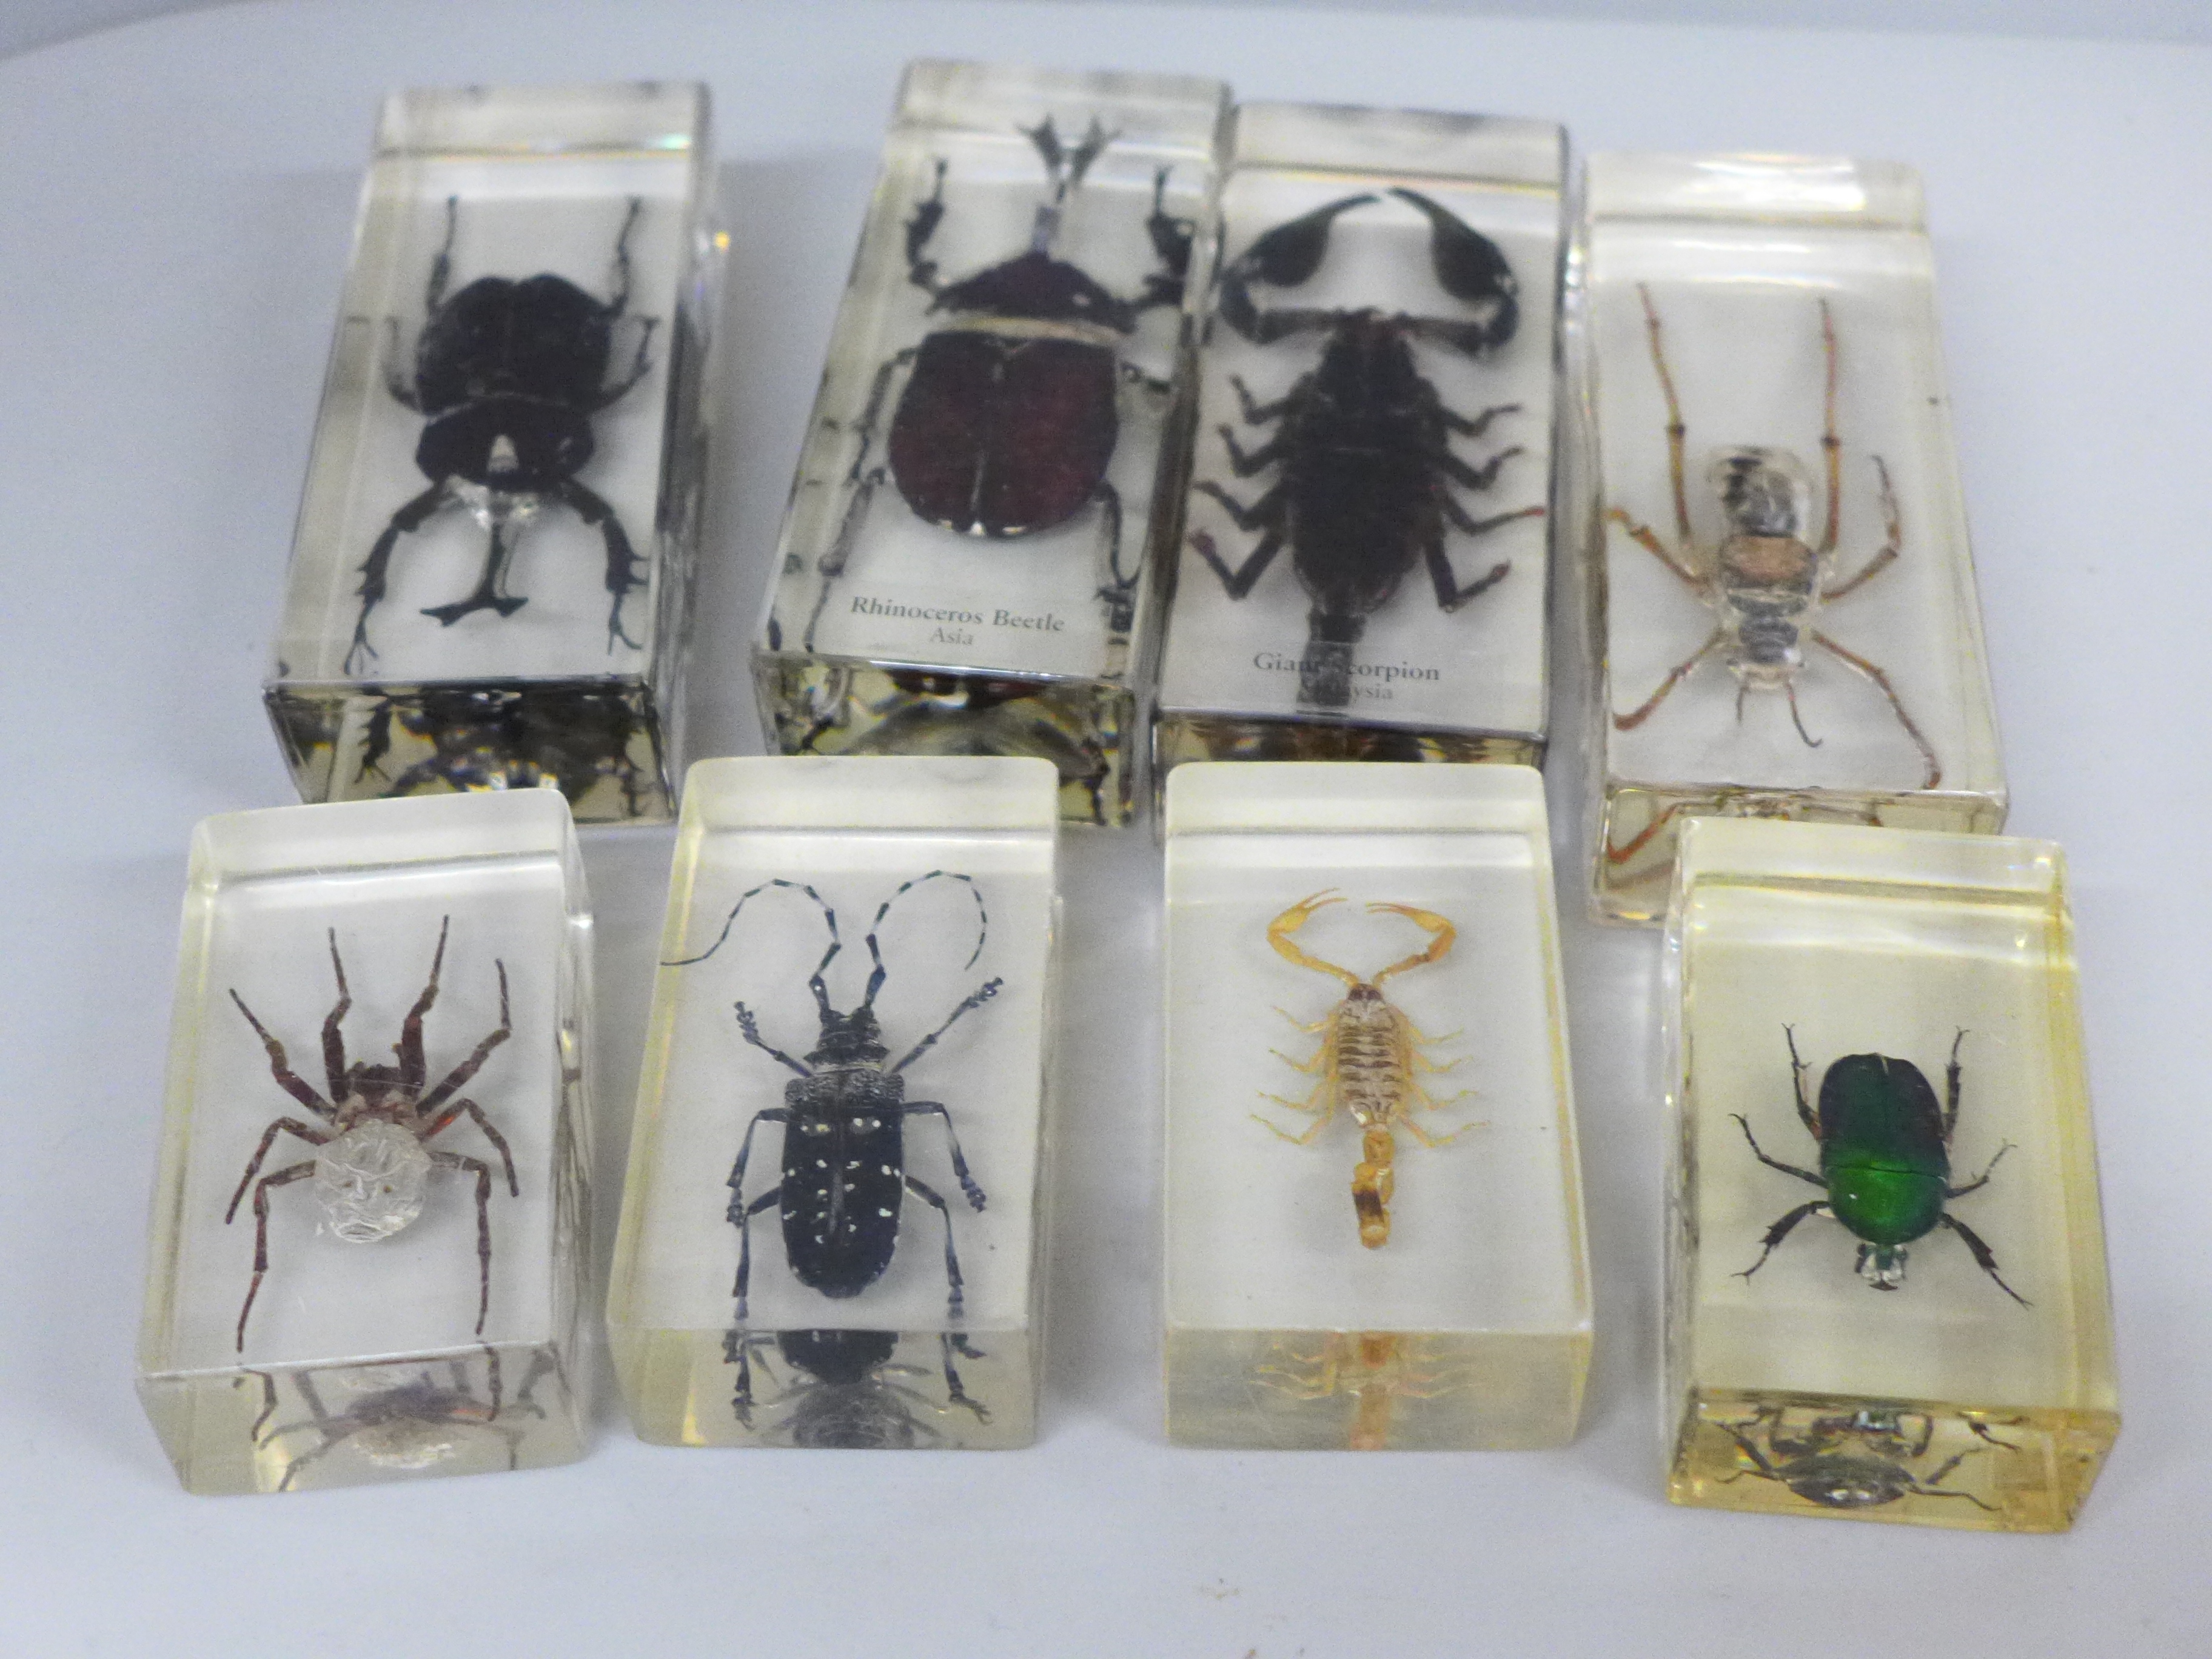 Eight insect specimens in resin, including Giant Scorpion and Rhinoceros Beetle